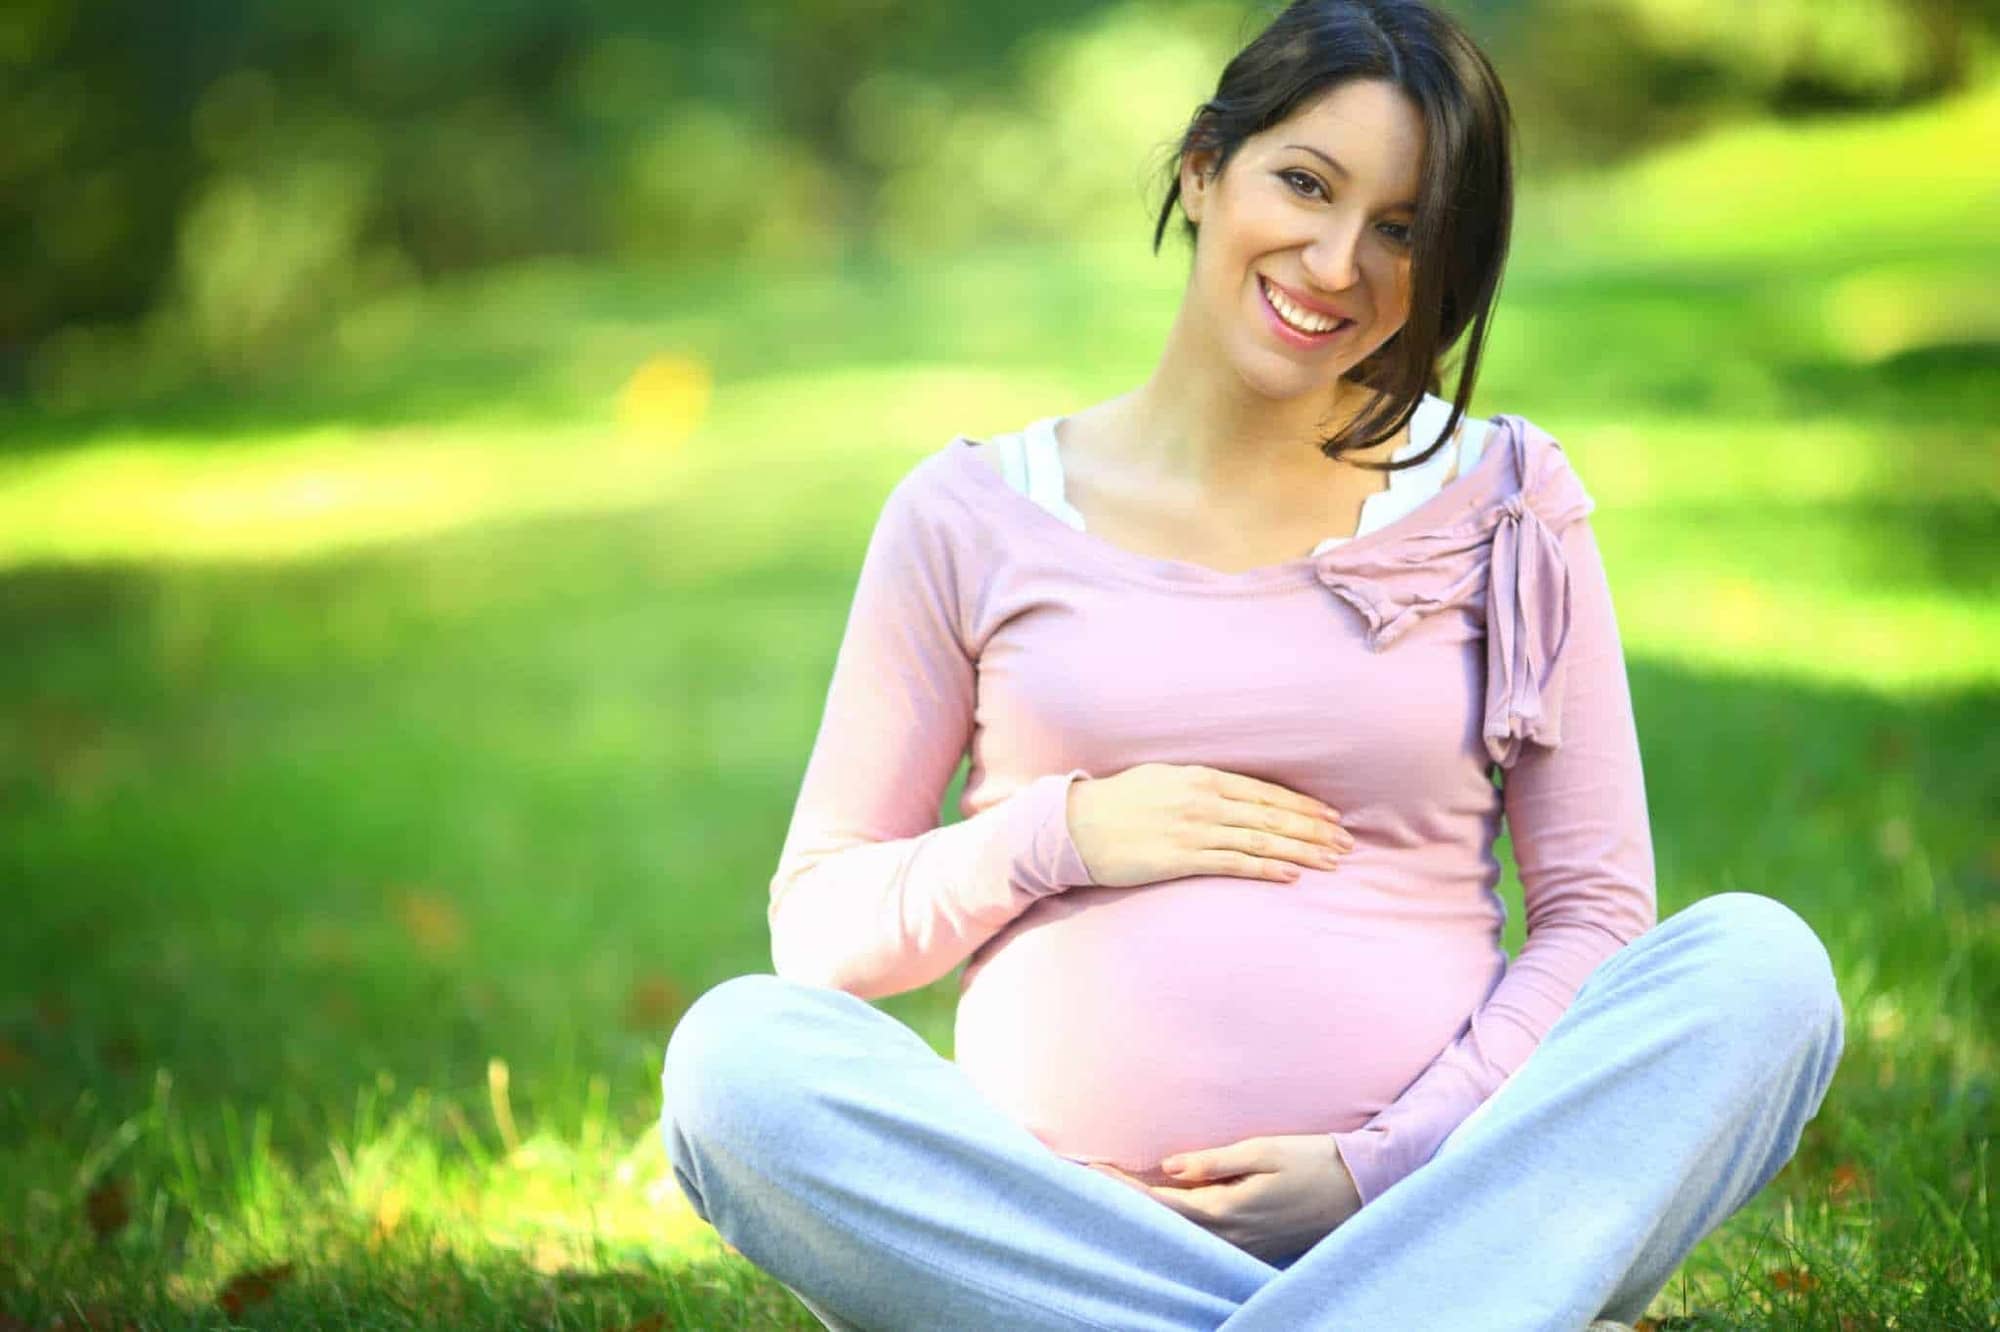 requirements for becoming a surrogate